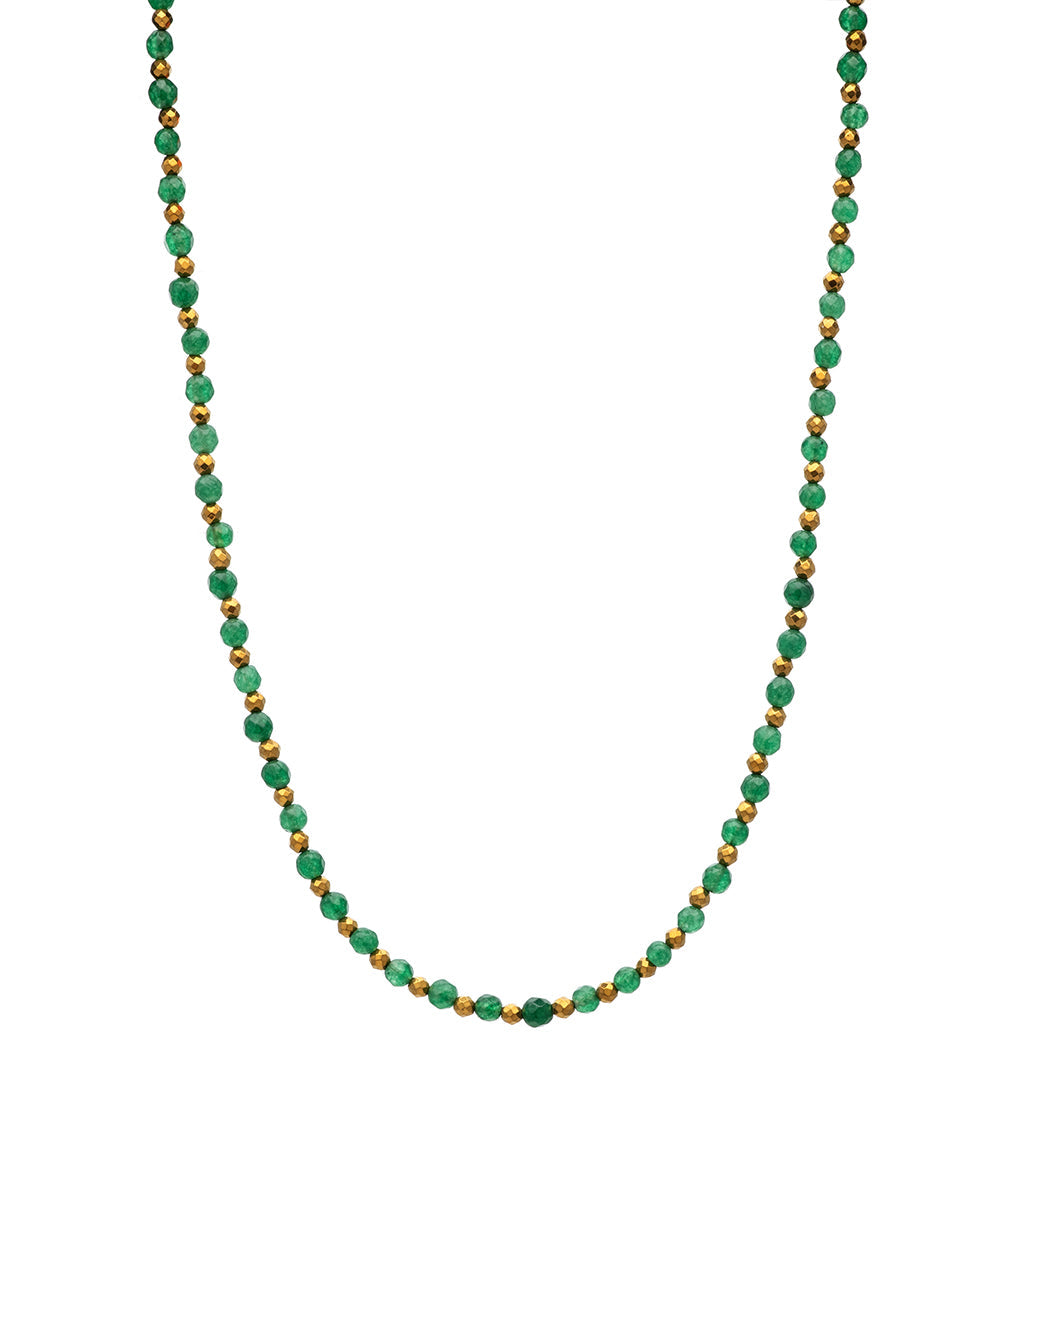 Green Love necklace